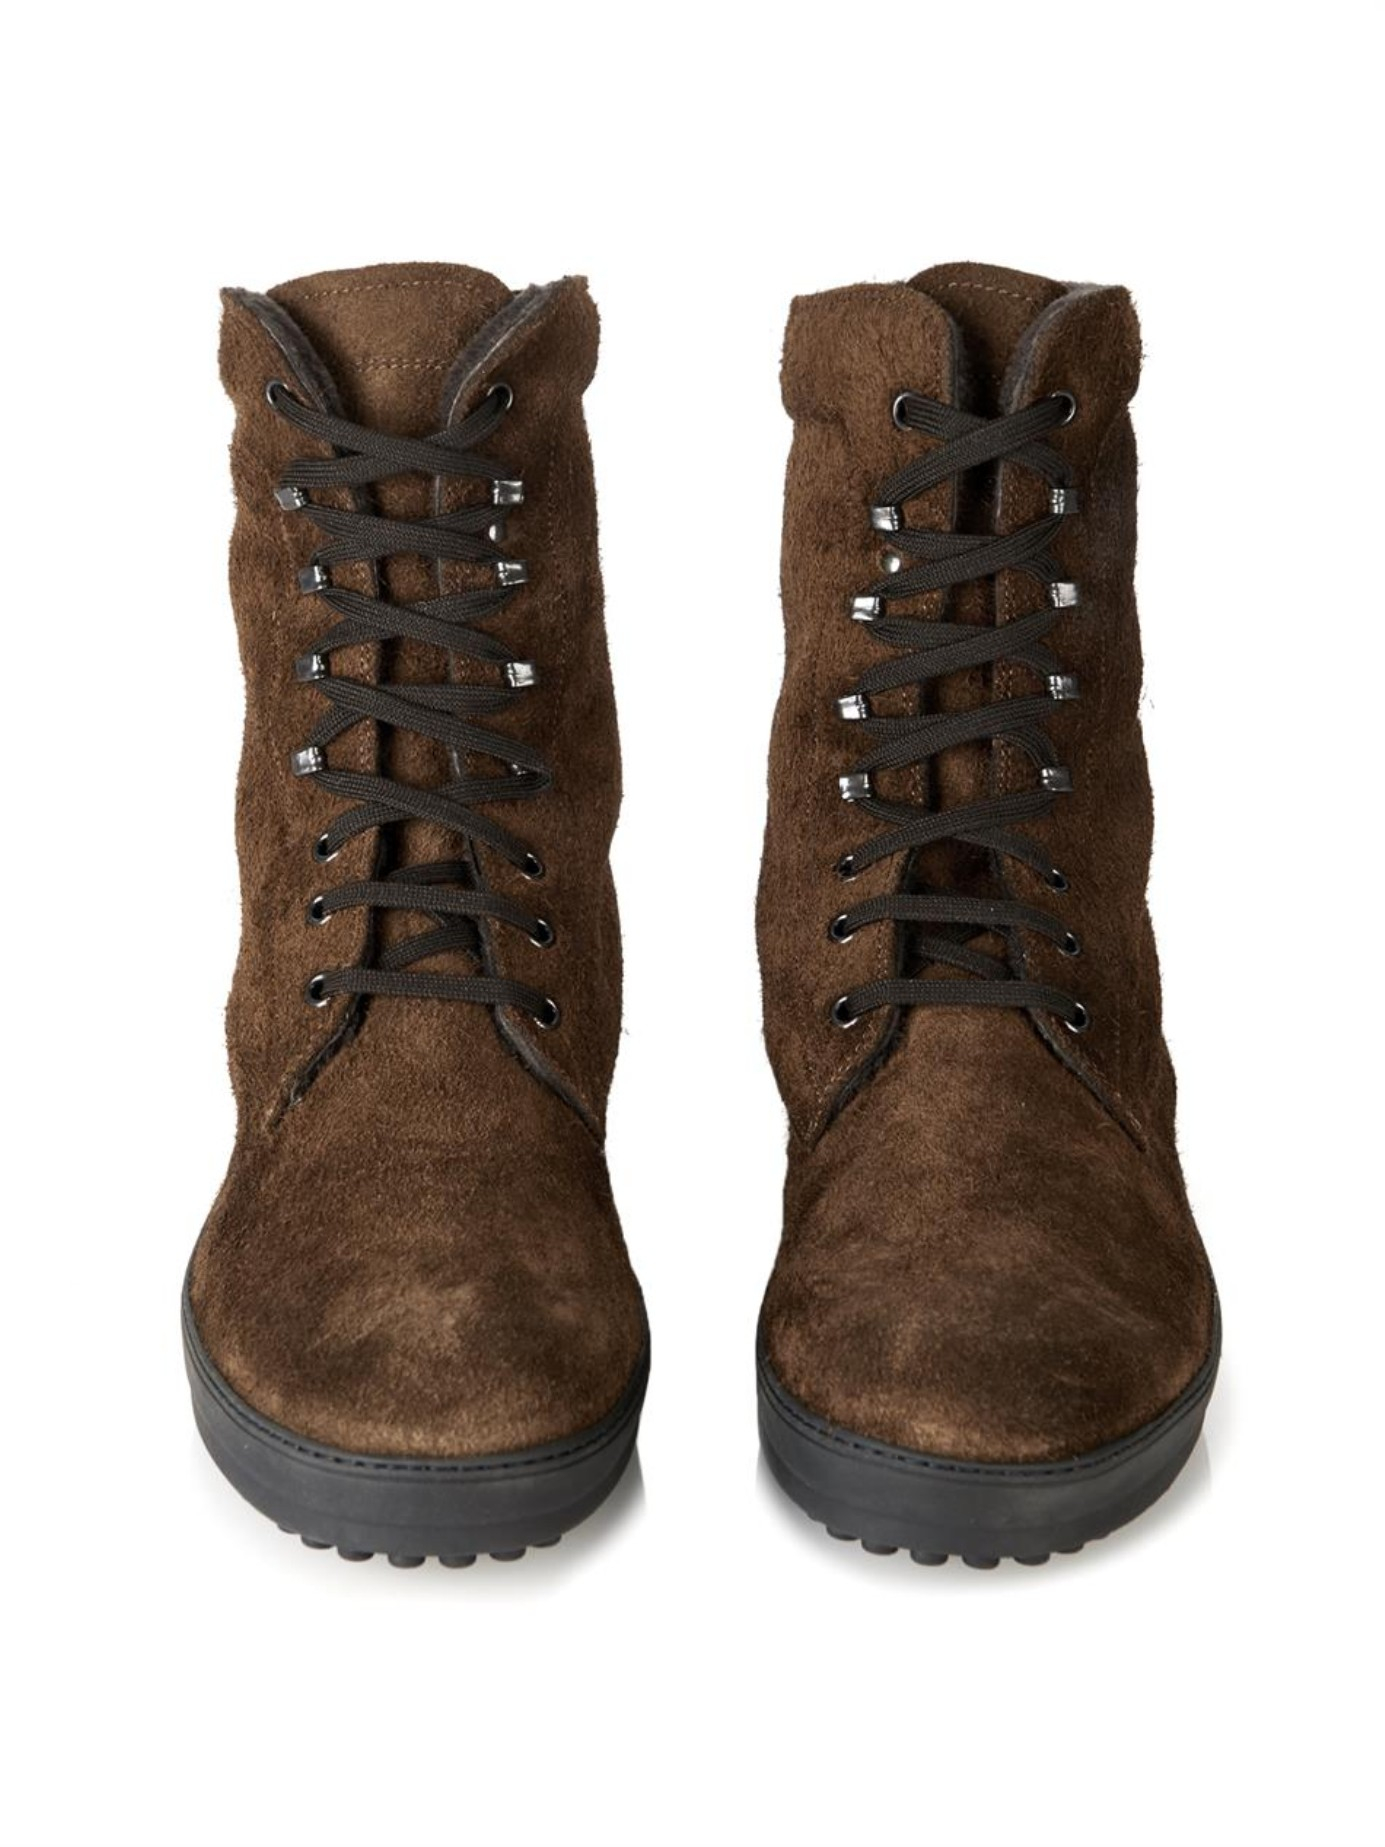 Lyst - Tod'S Shearling-Lined Suede Winter Boots in Brown for Men